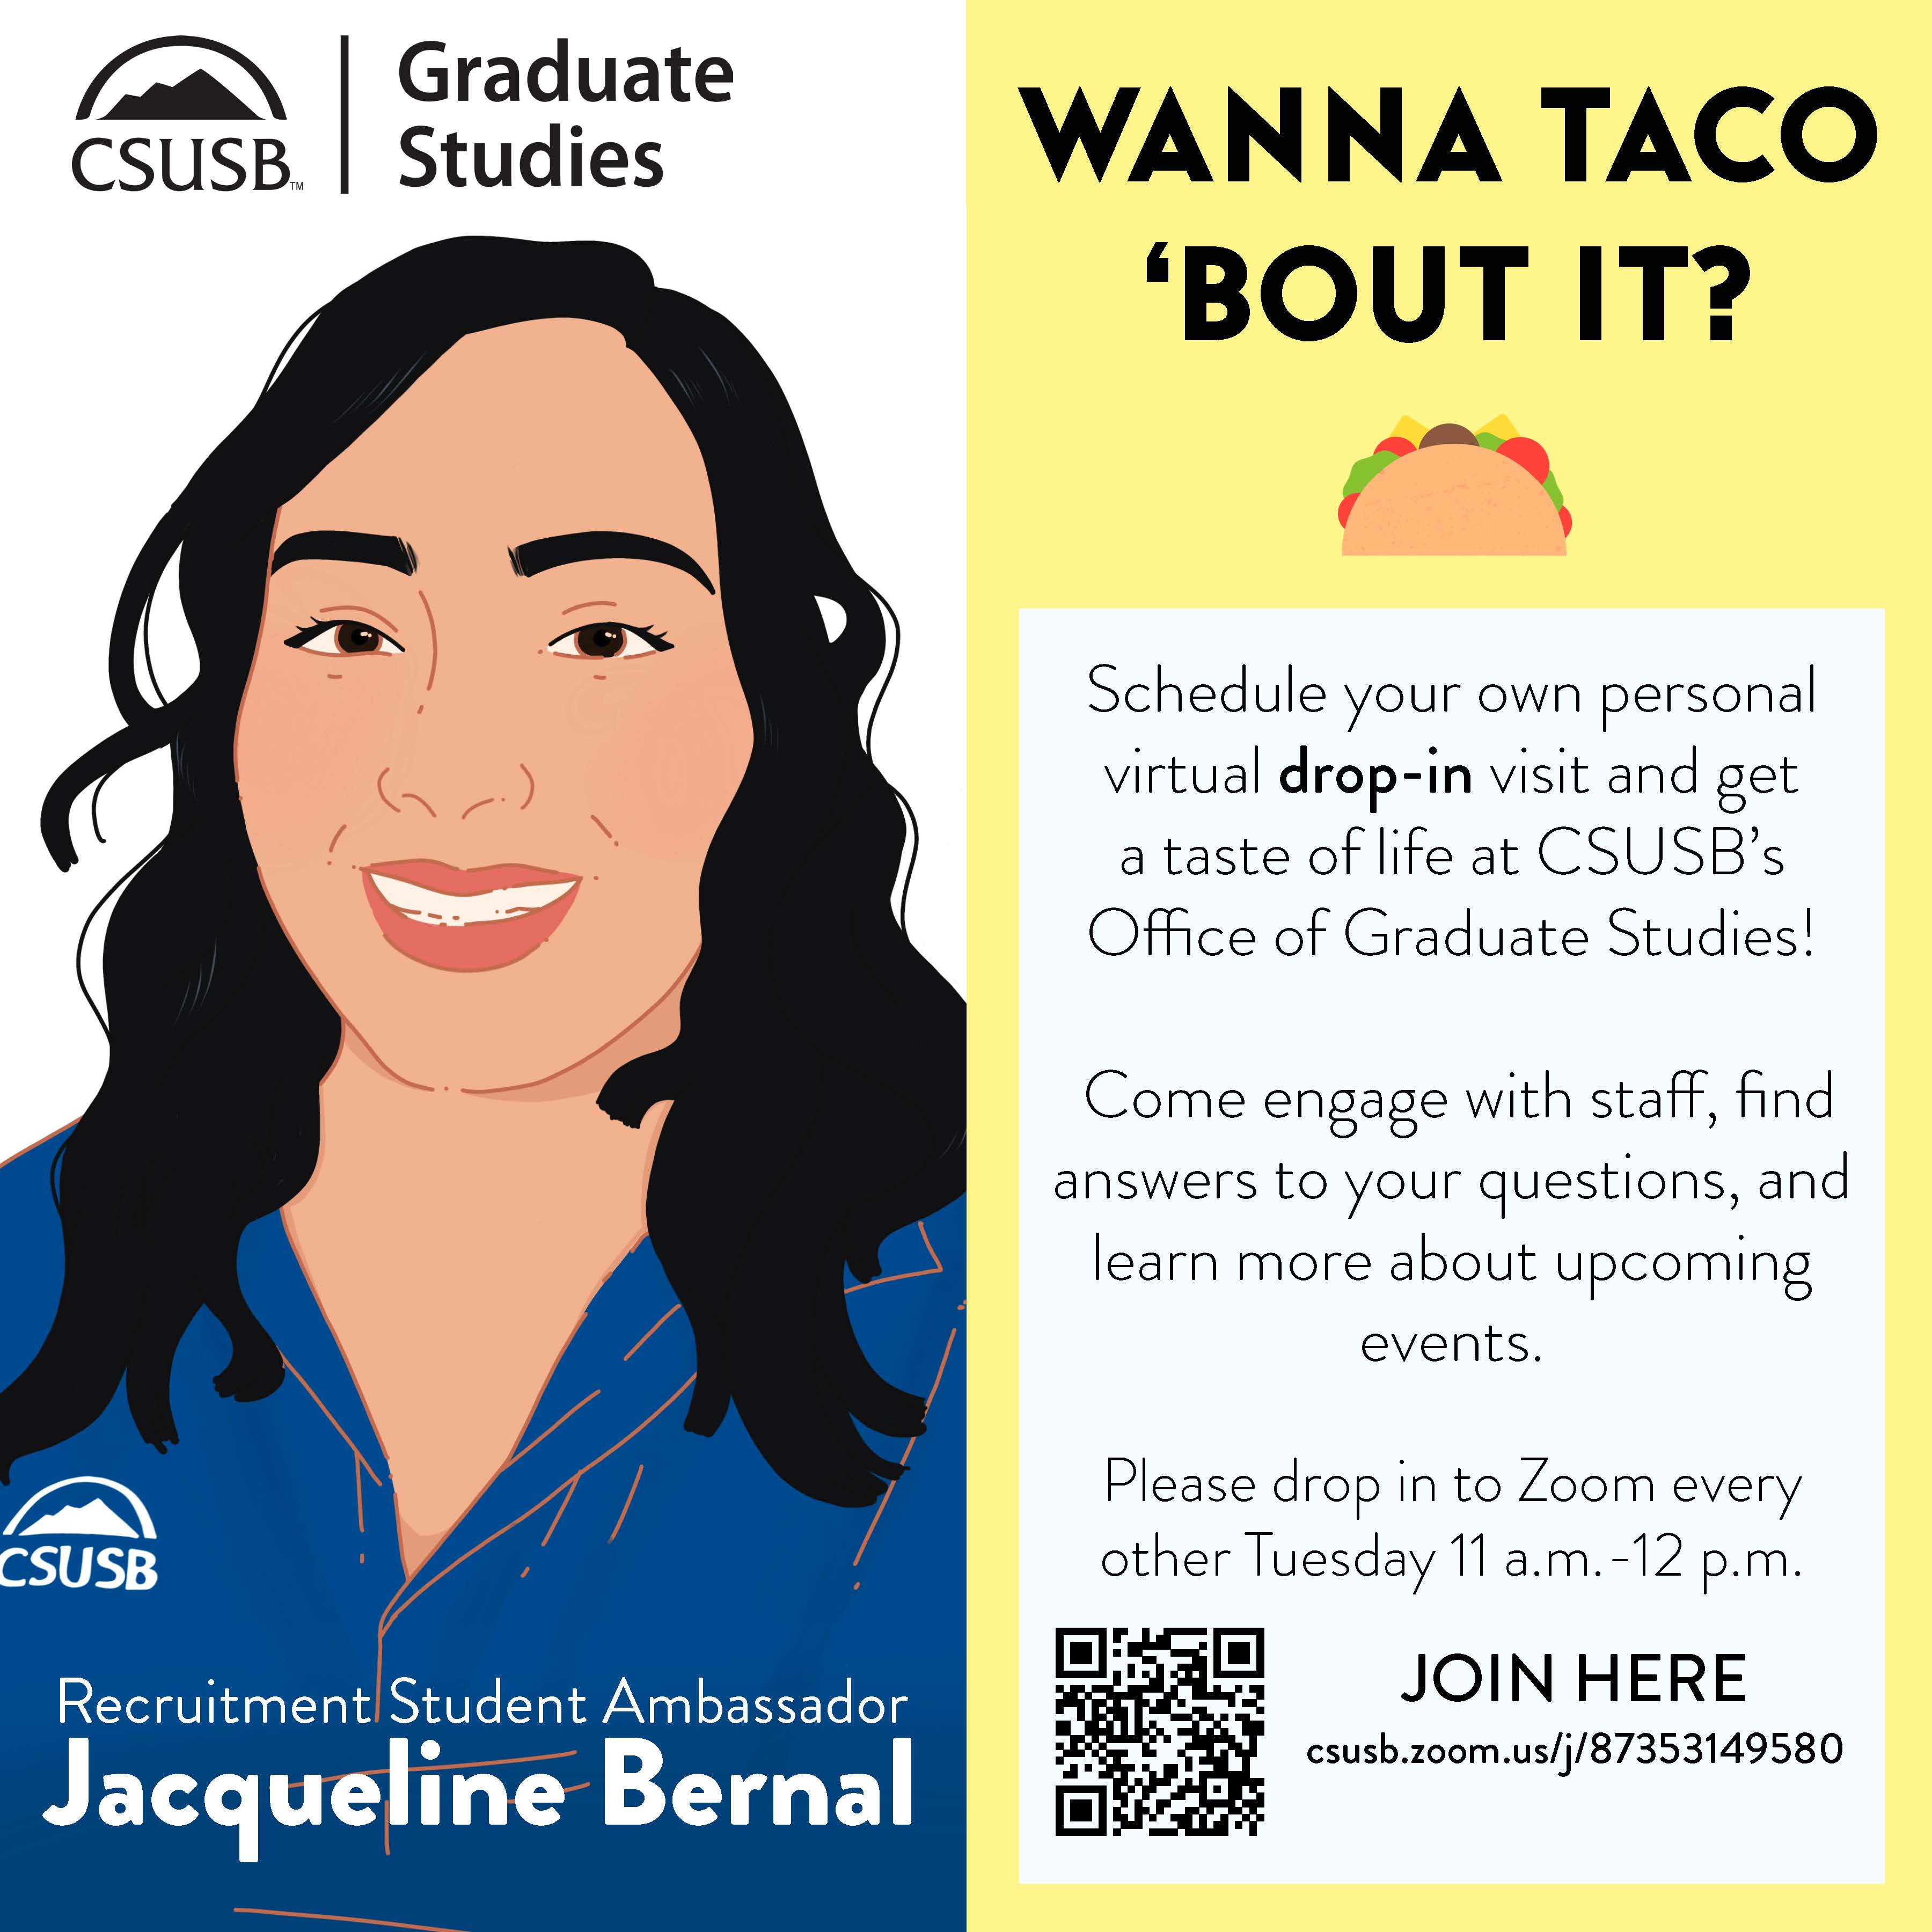 Schedule your own personal virtual drop-in visit and get a taste of life at CSUSB’s Office of Graduate Studies! Come engage with staff, find answers to your questions, and learn more about upcoming events